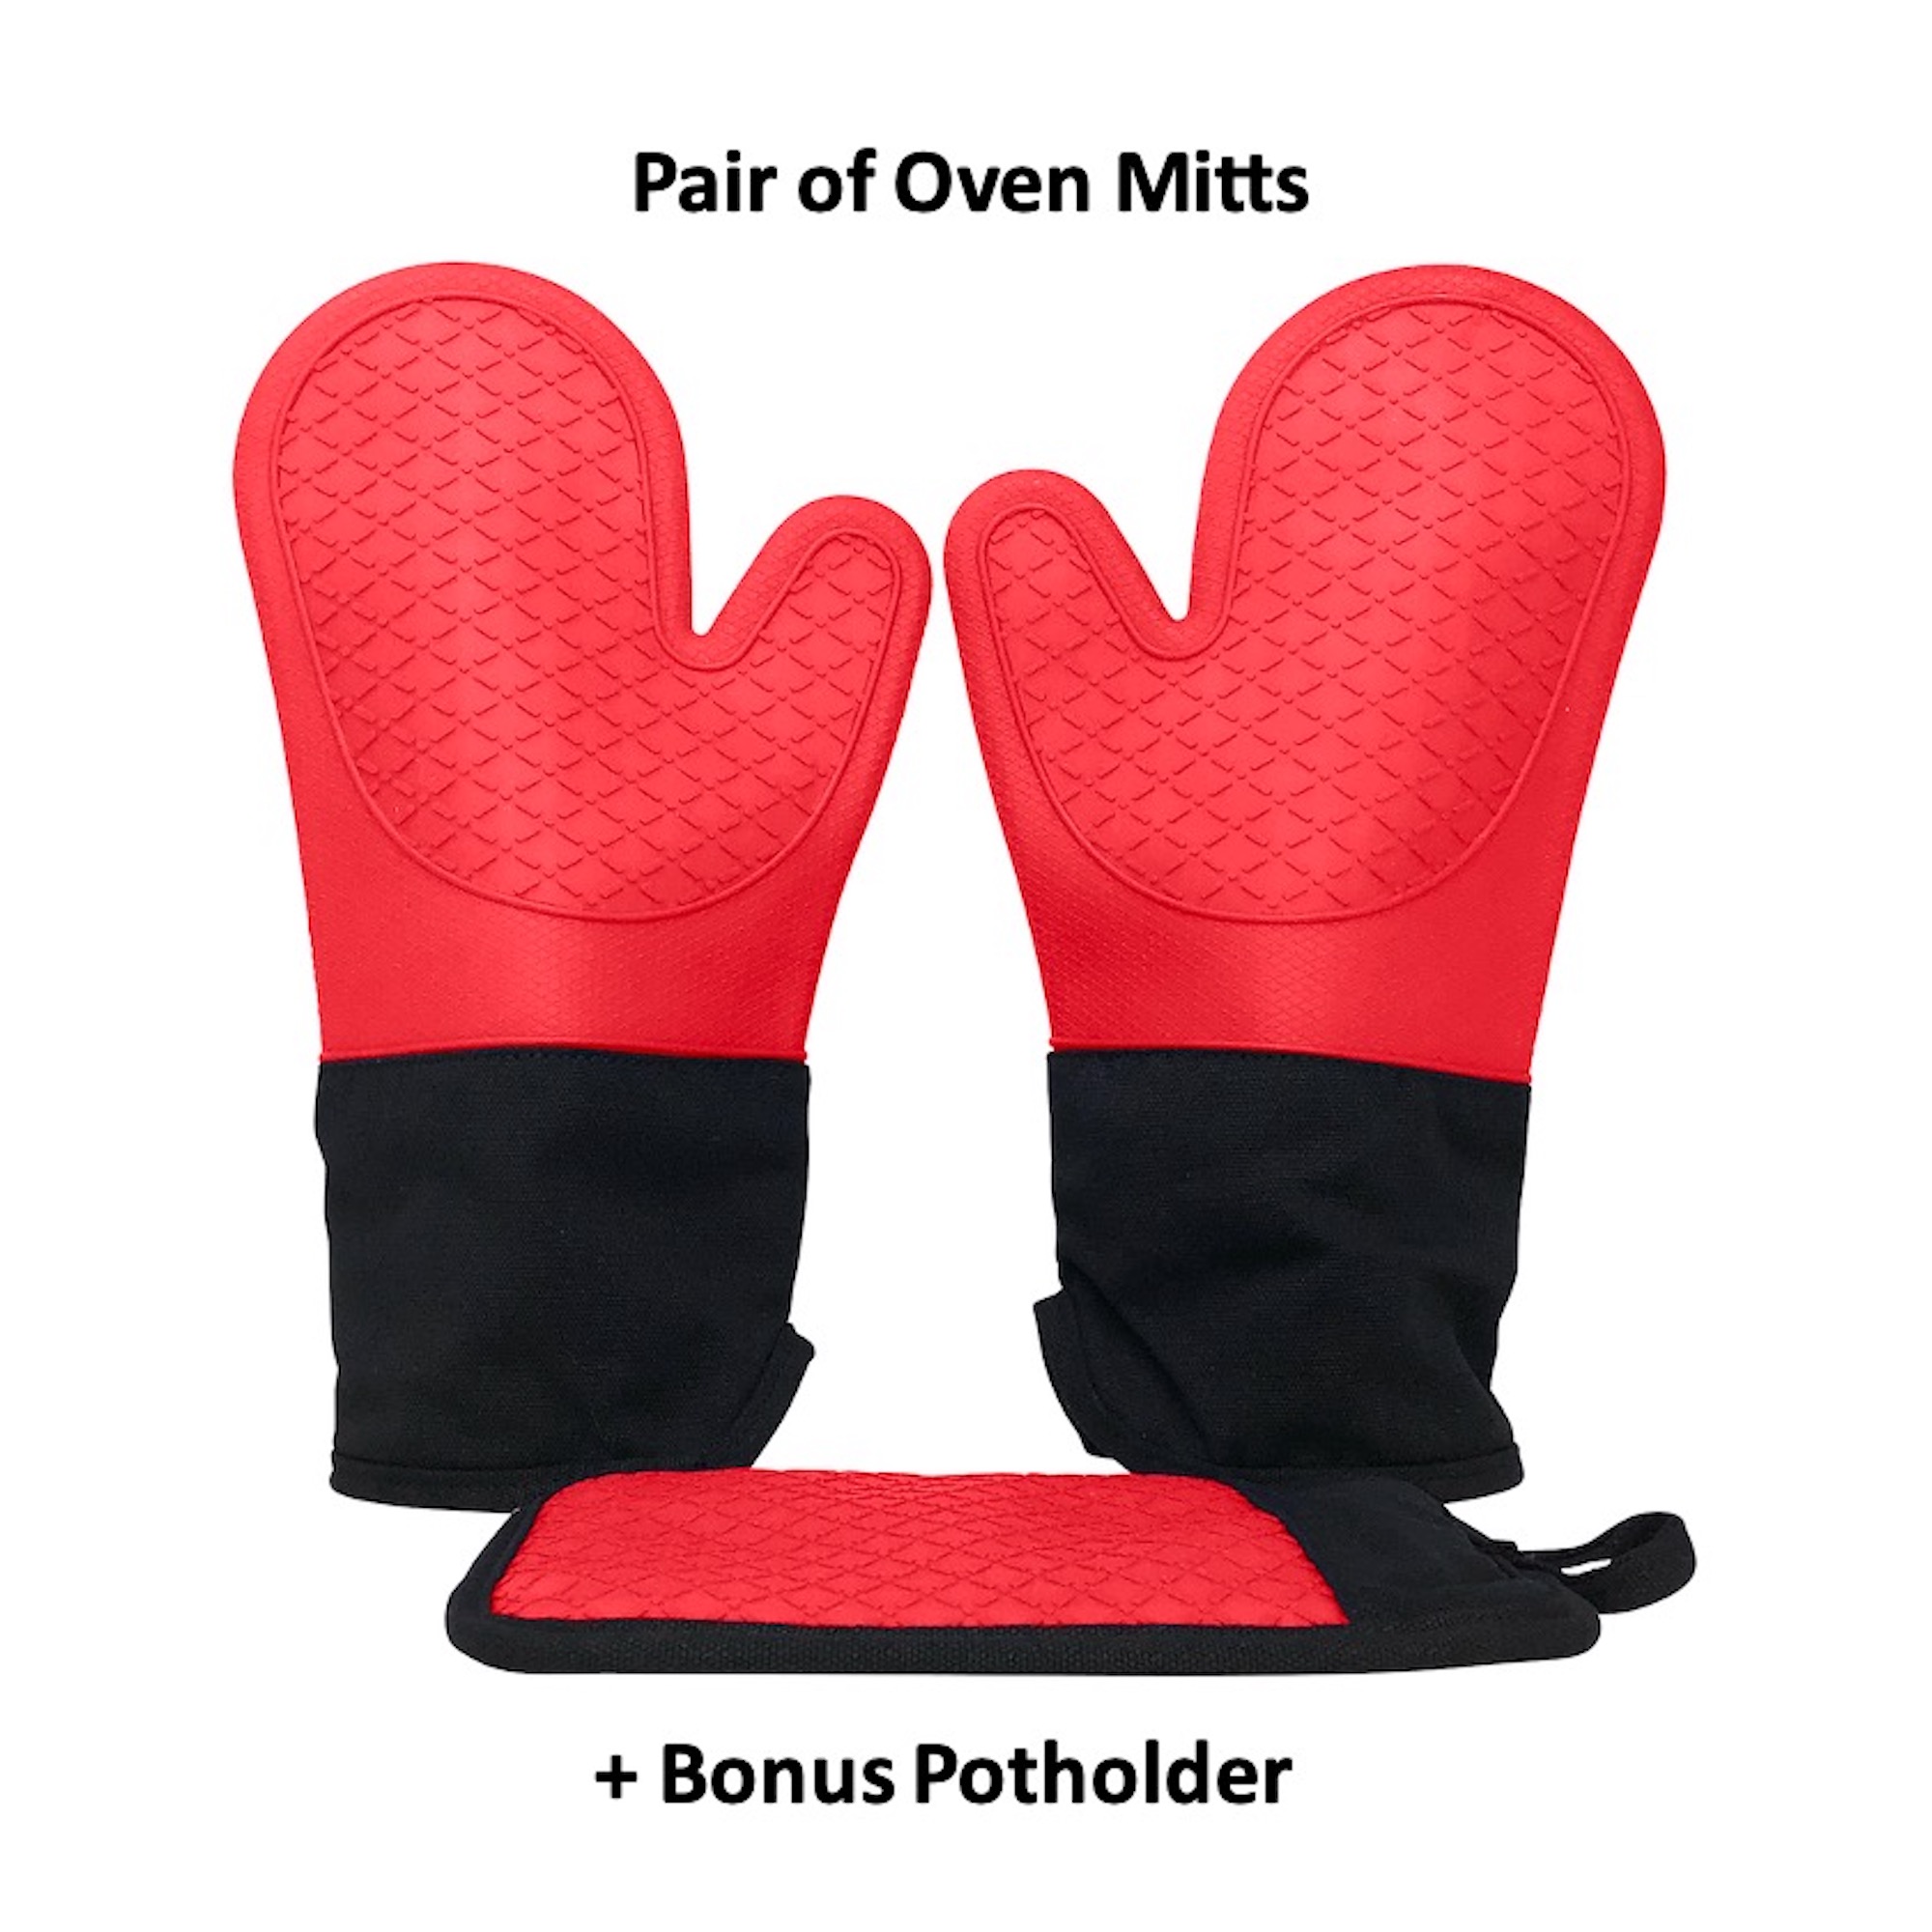 Ecoberi Silicone Oven Mitts and Pot Holder Set, Heat Resistant, Cook, Bake, BBQ, Pack of 3 Red - image 1 of 6